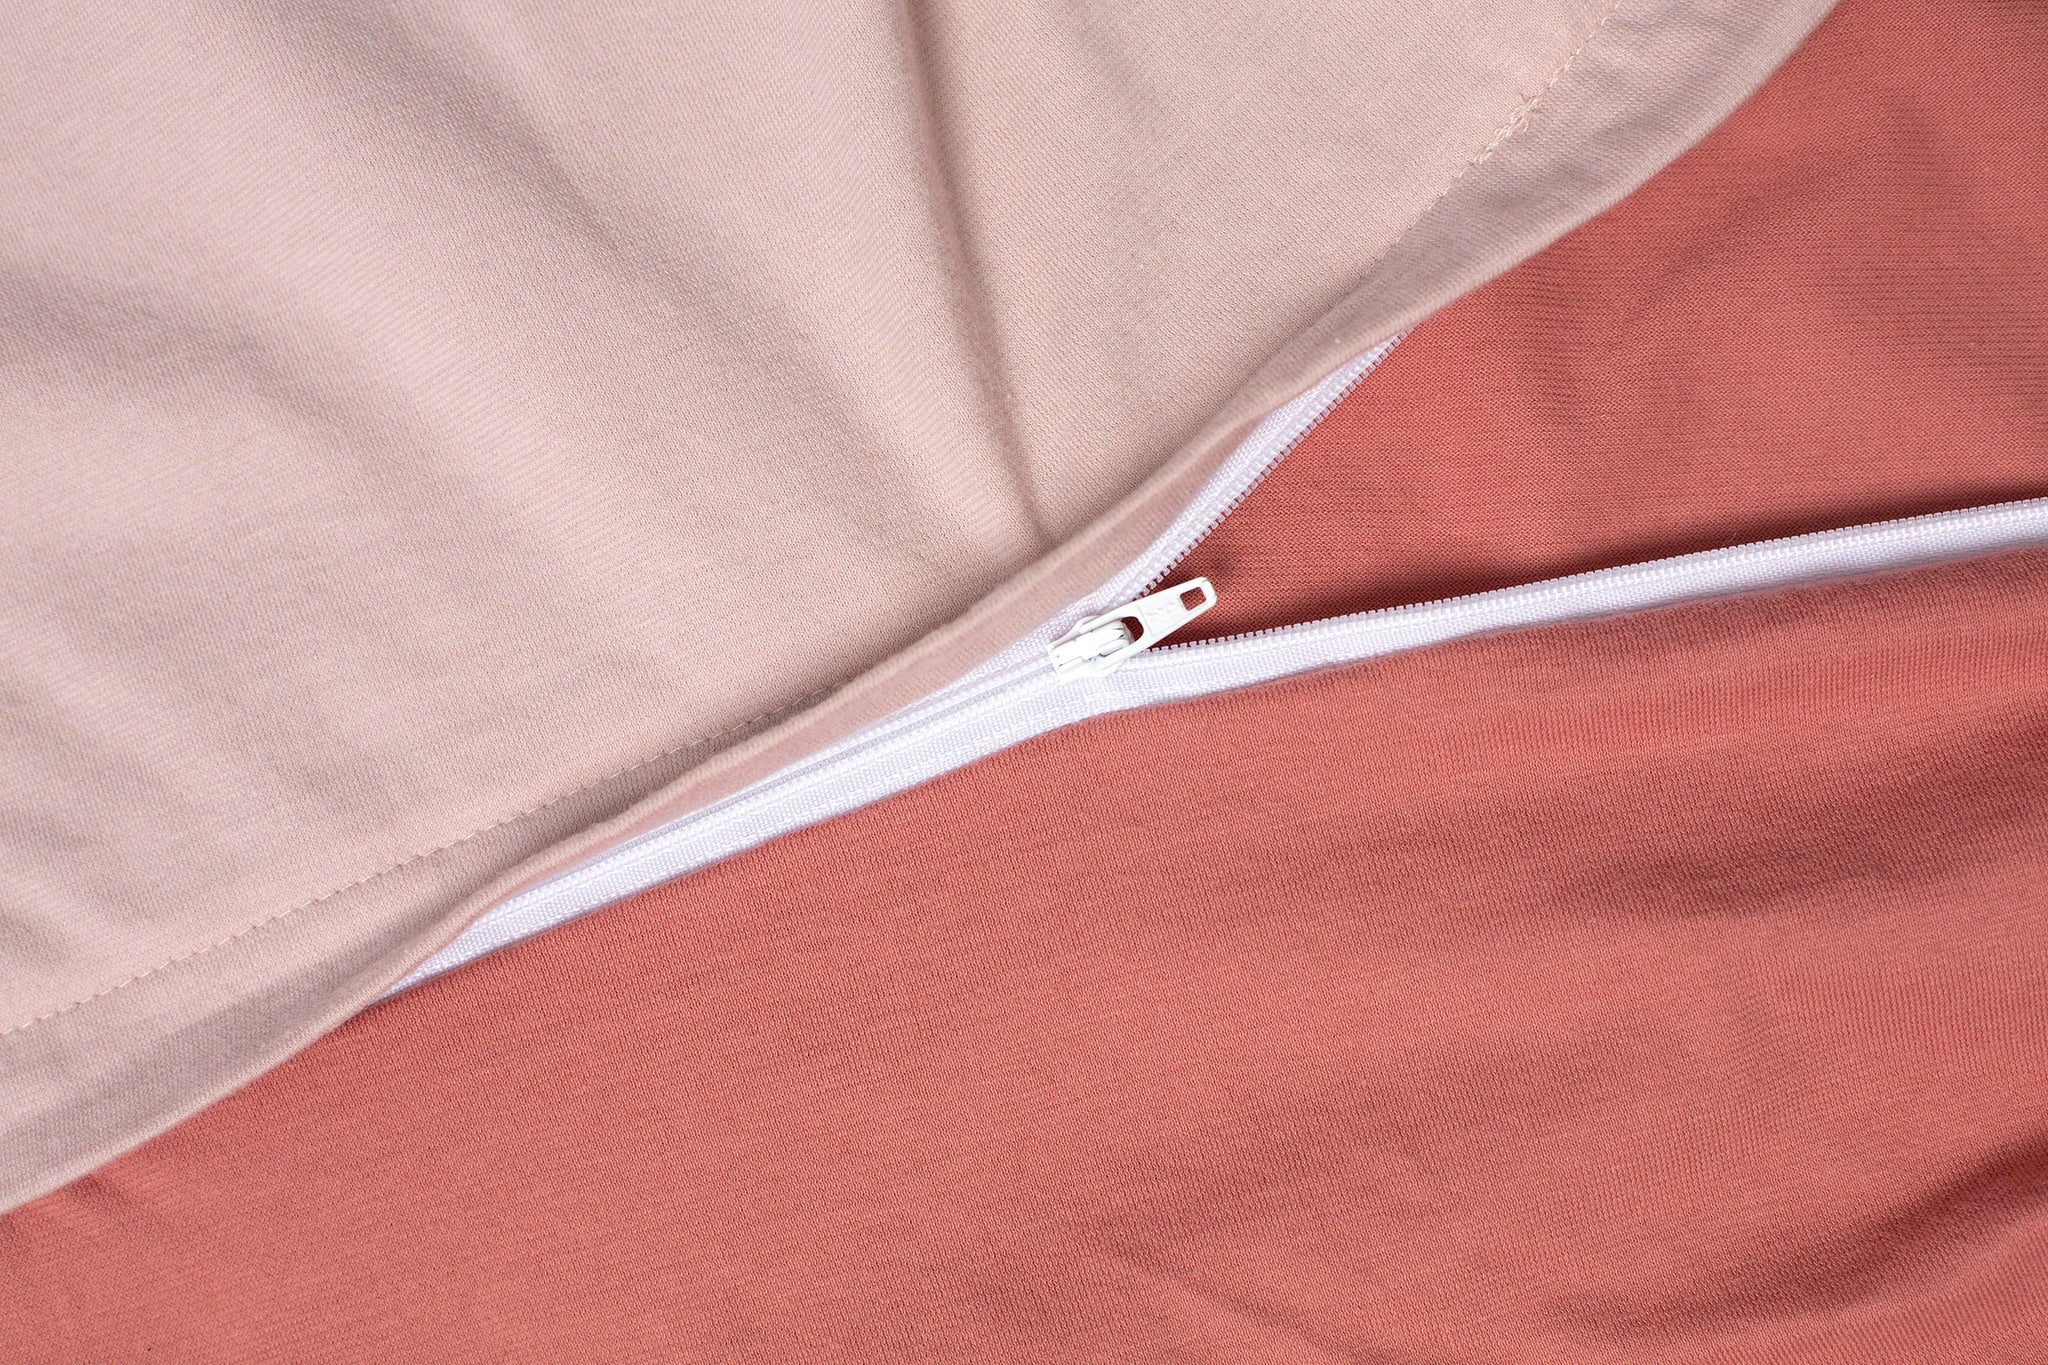 Fitted Sheet | The Insider's Guide On Picking The Right Fitted Sheet For Your Bed